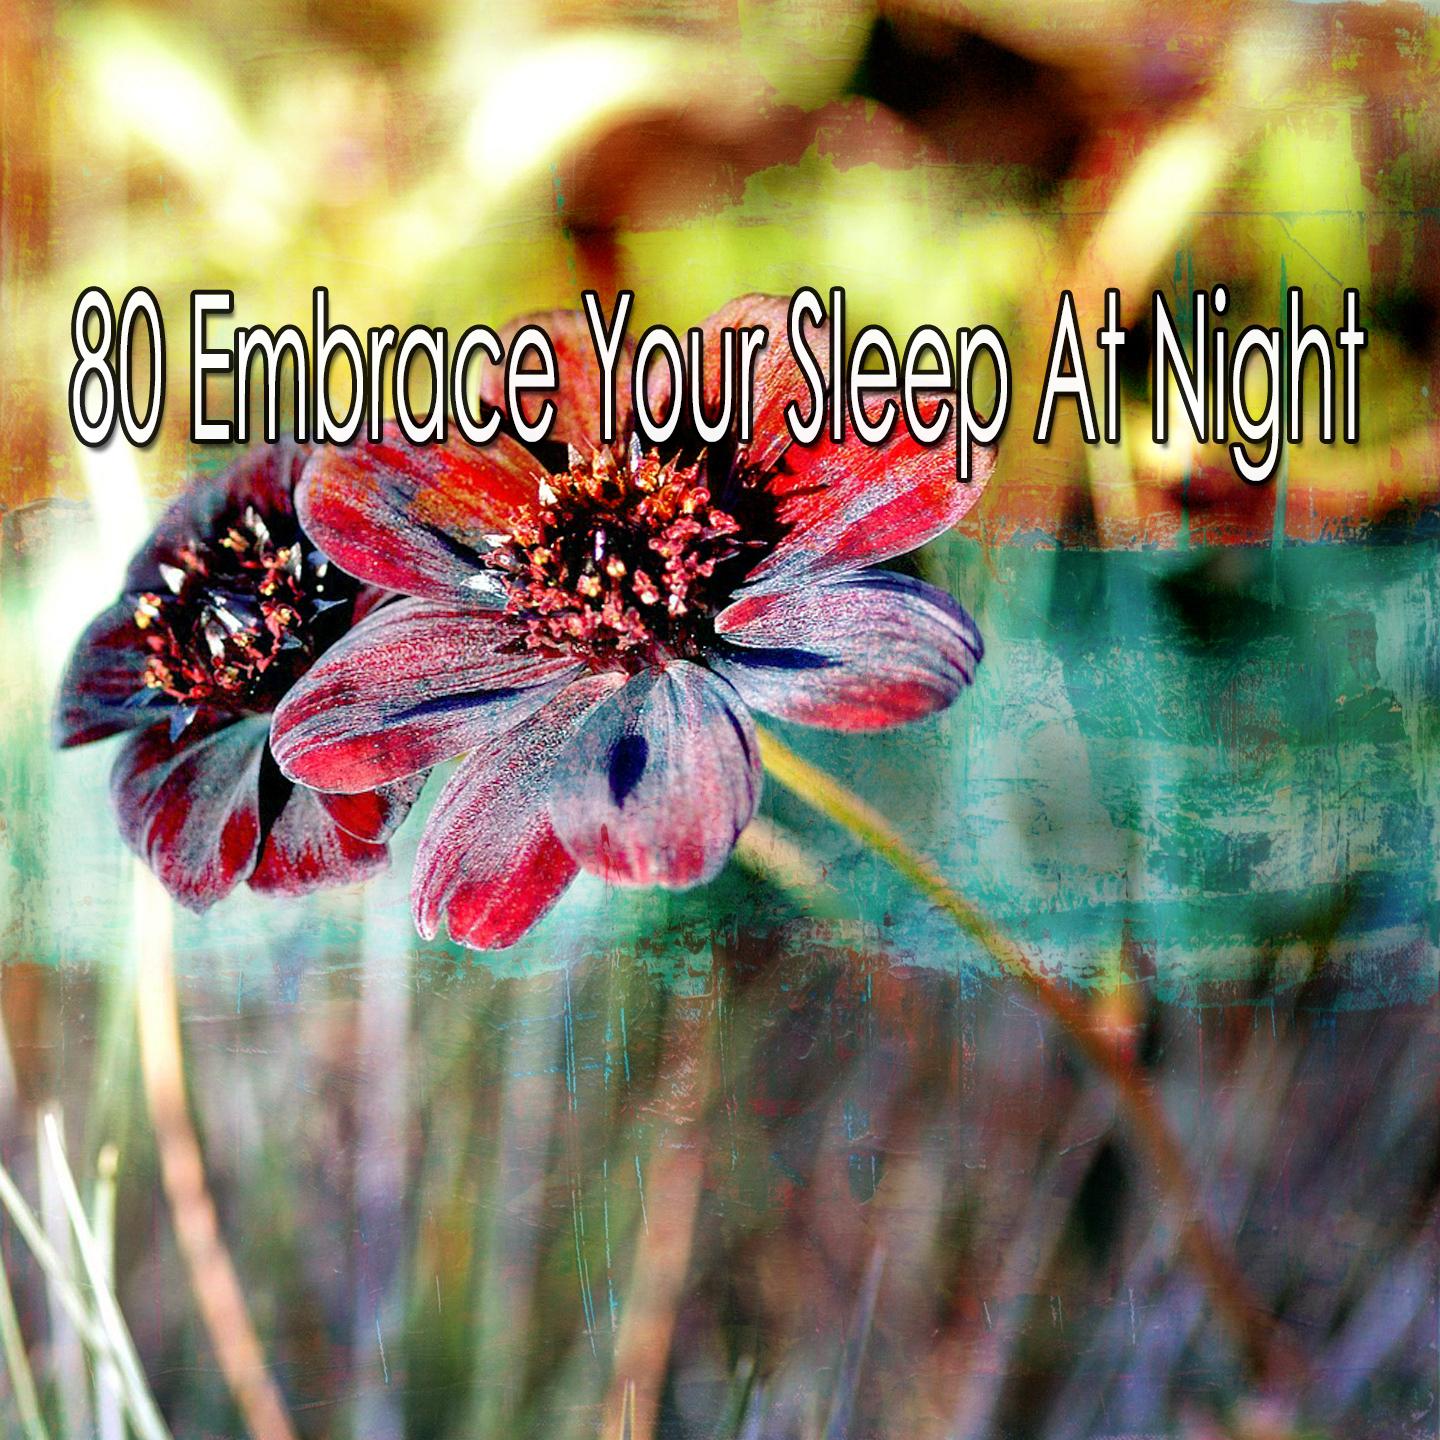 80 Embrace Your Sleep at Night